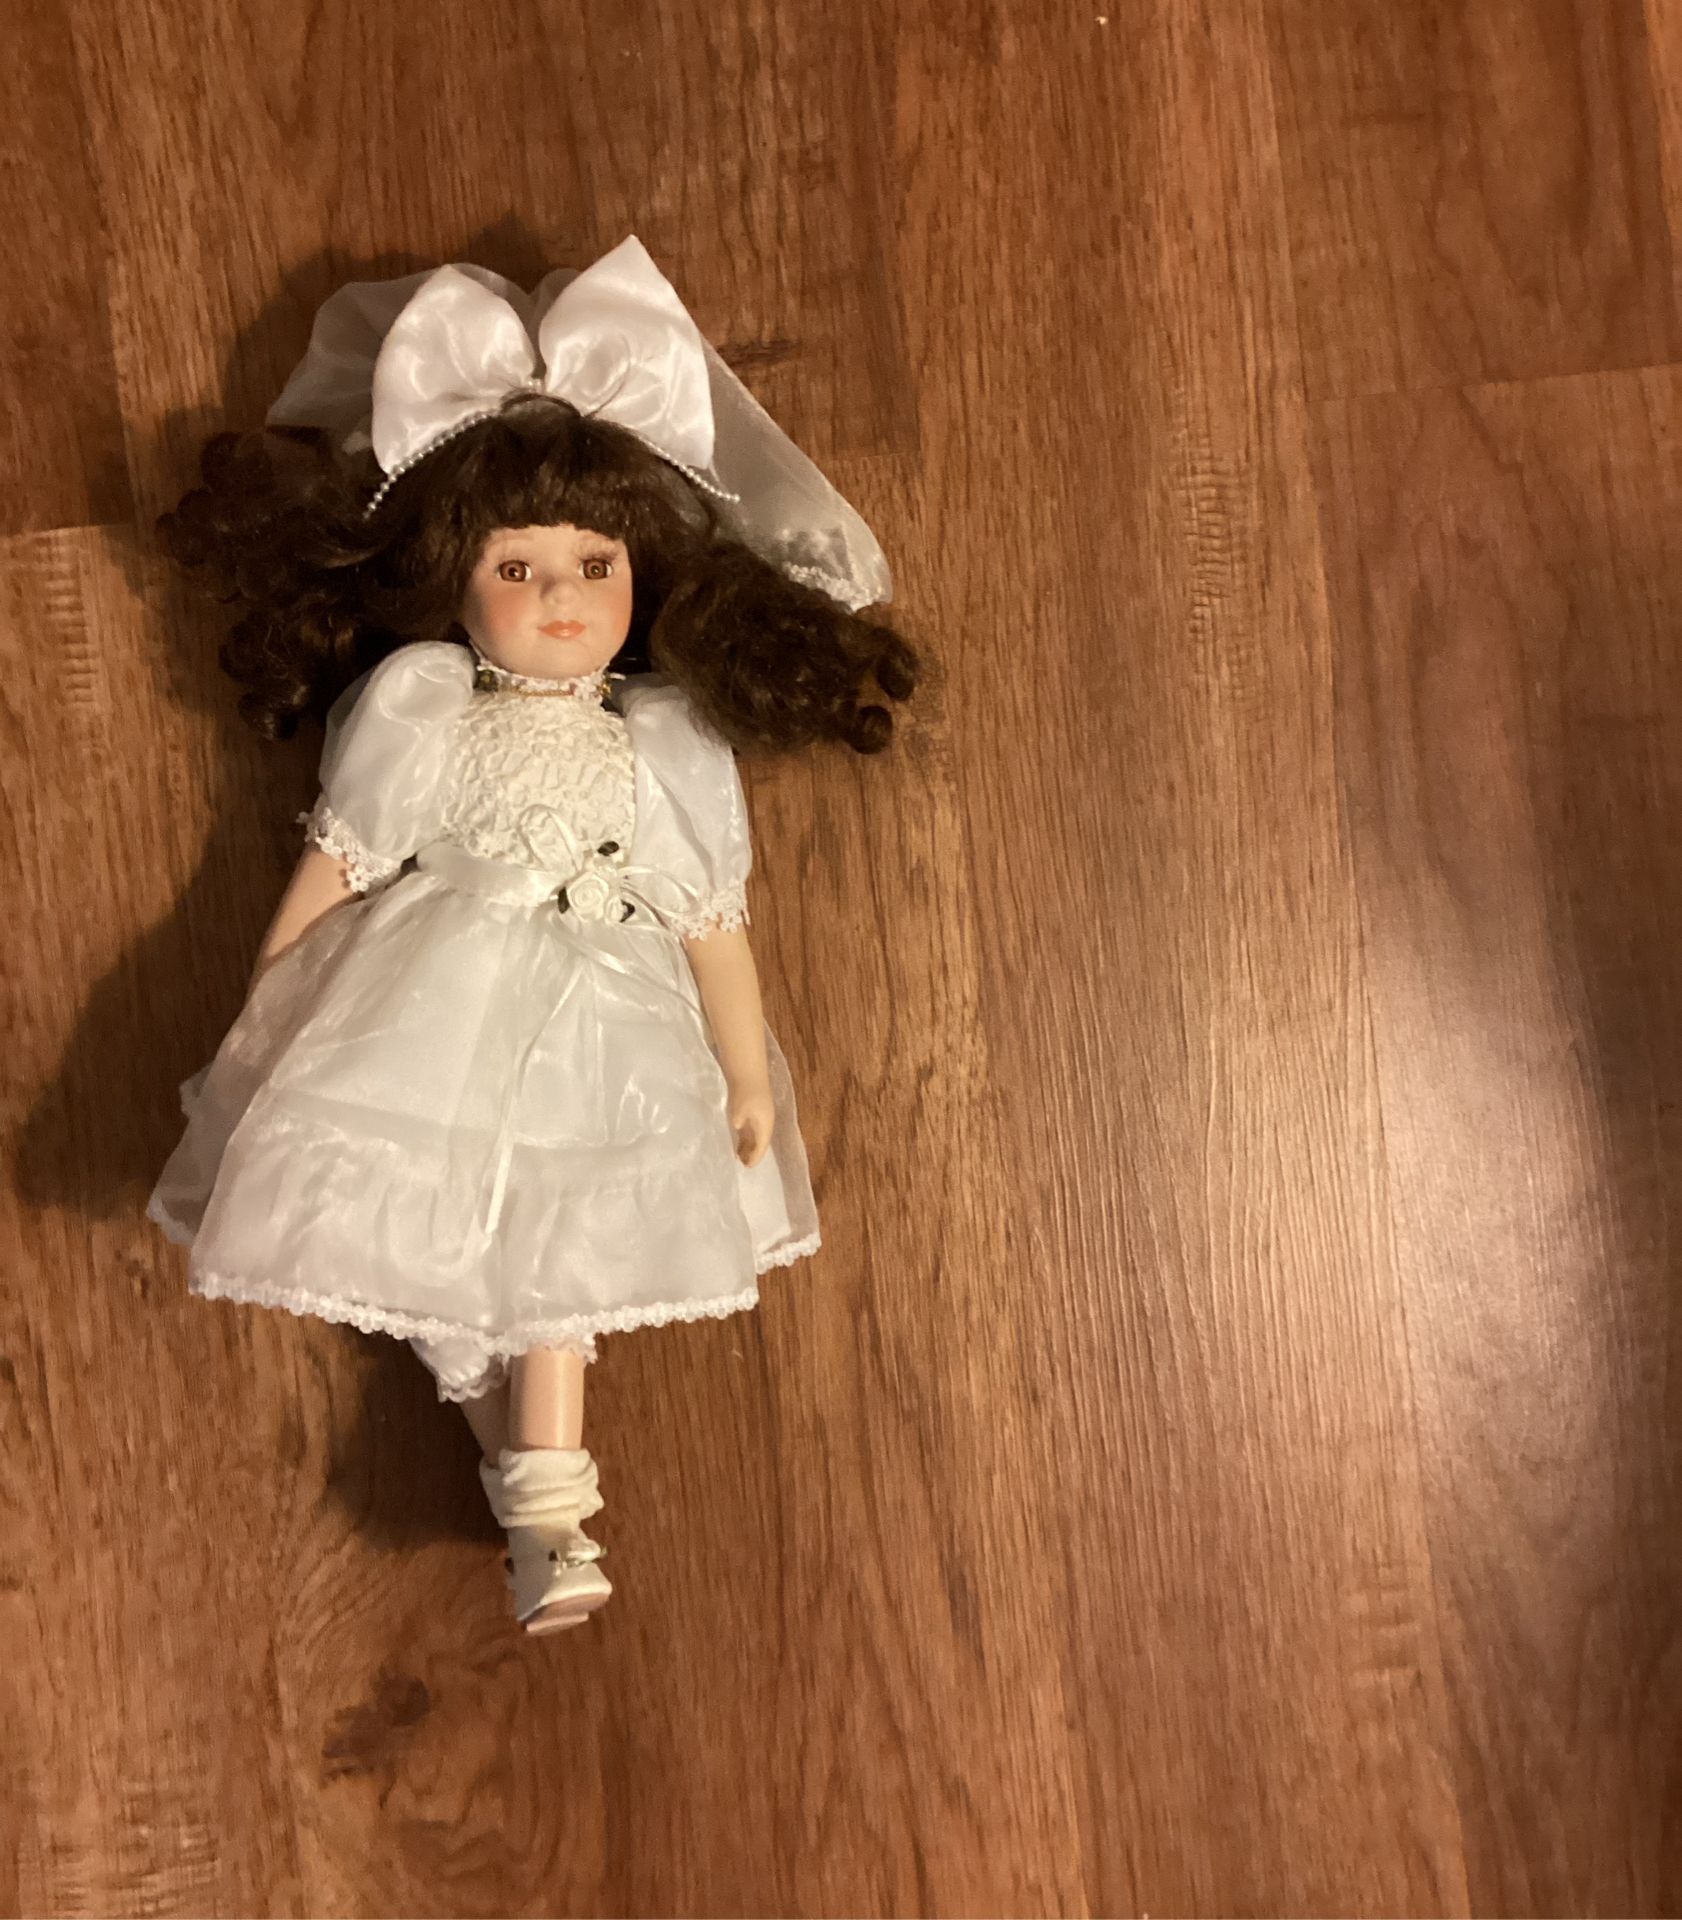 Porcelain Doll   Collectible